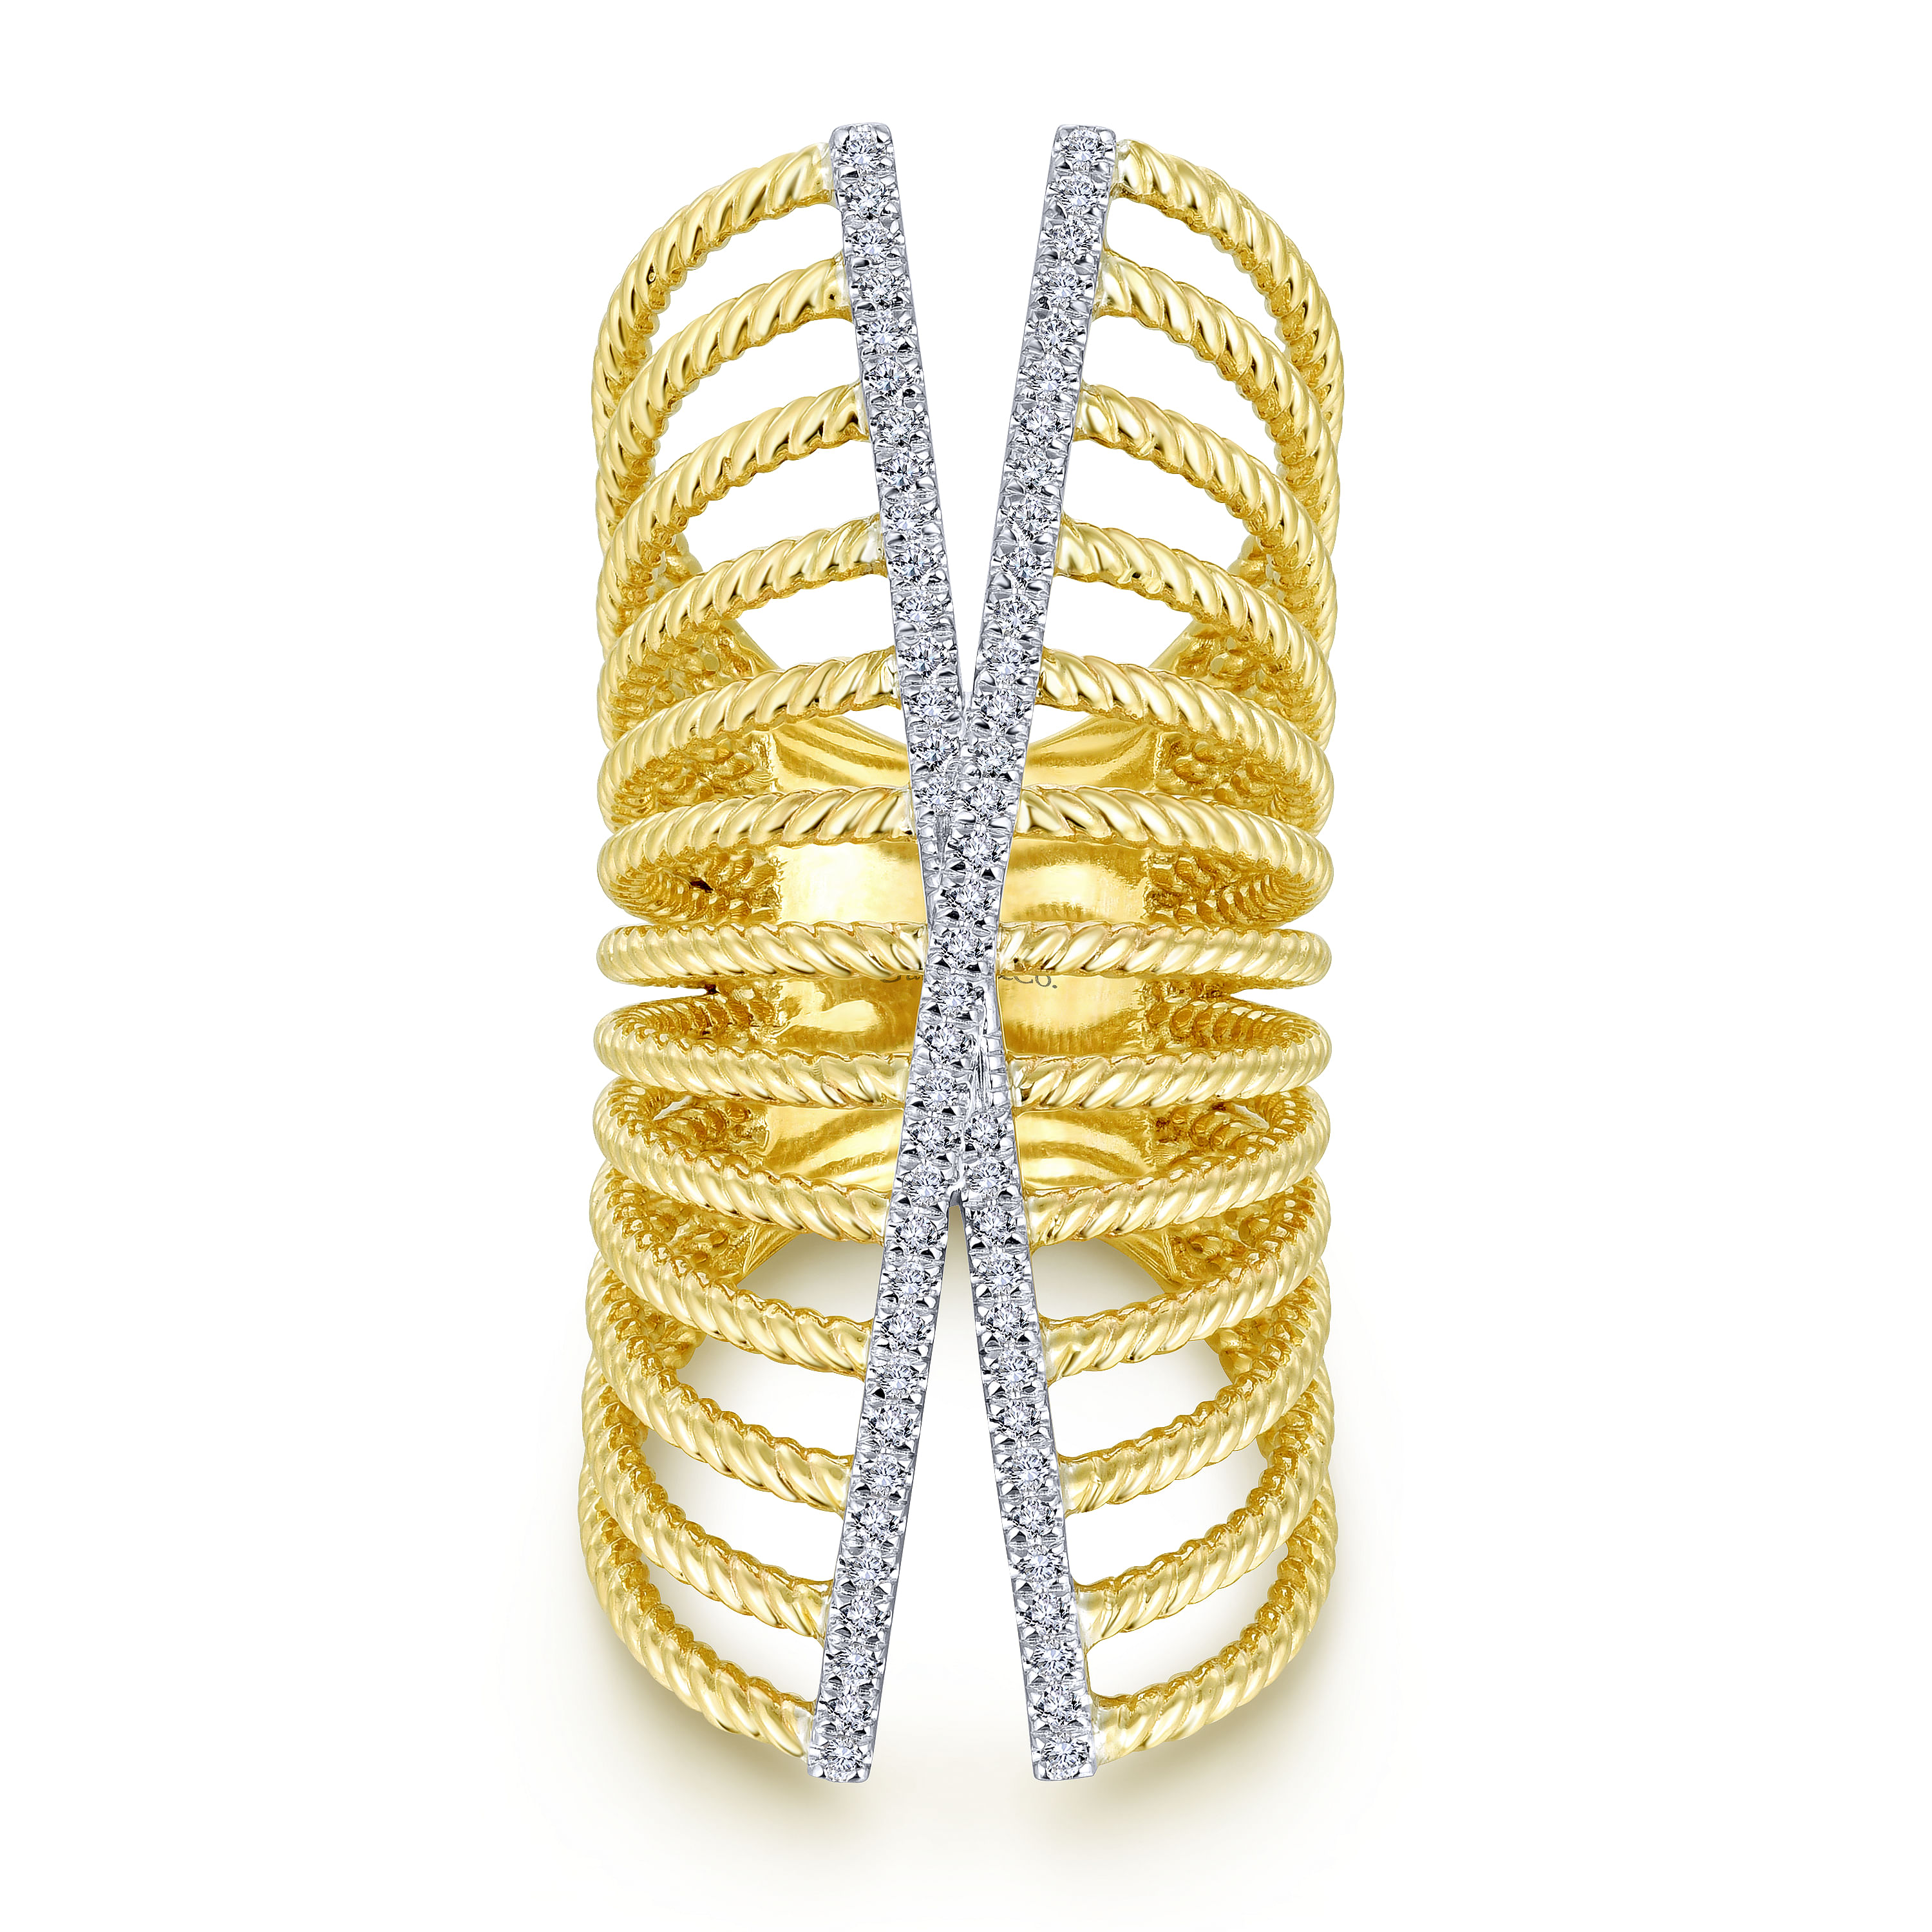 14K Yellow Gold Twisted Wide Band Diamond Cage Ring